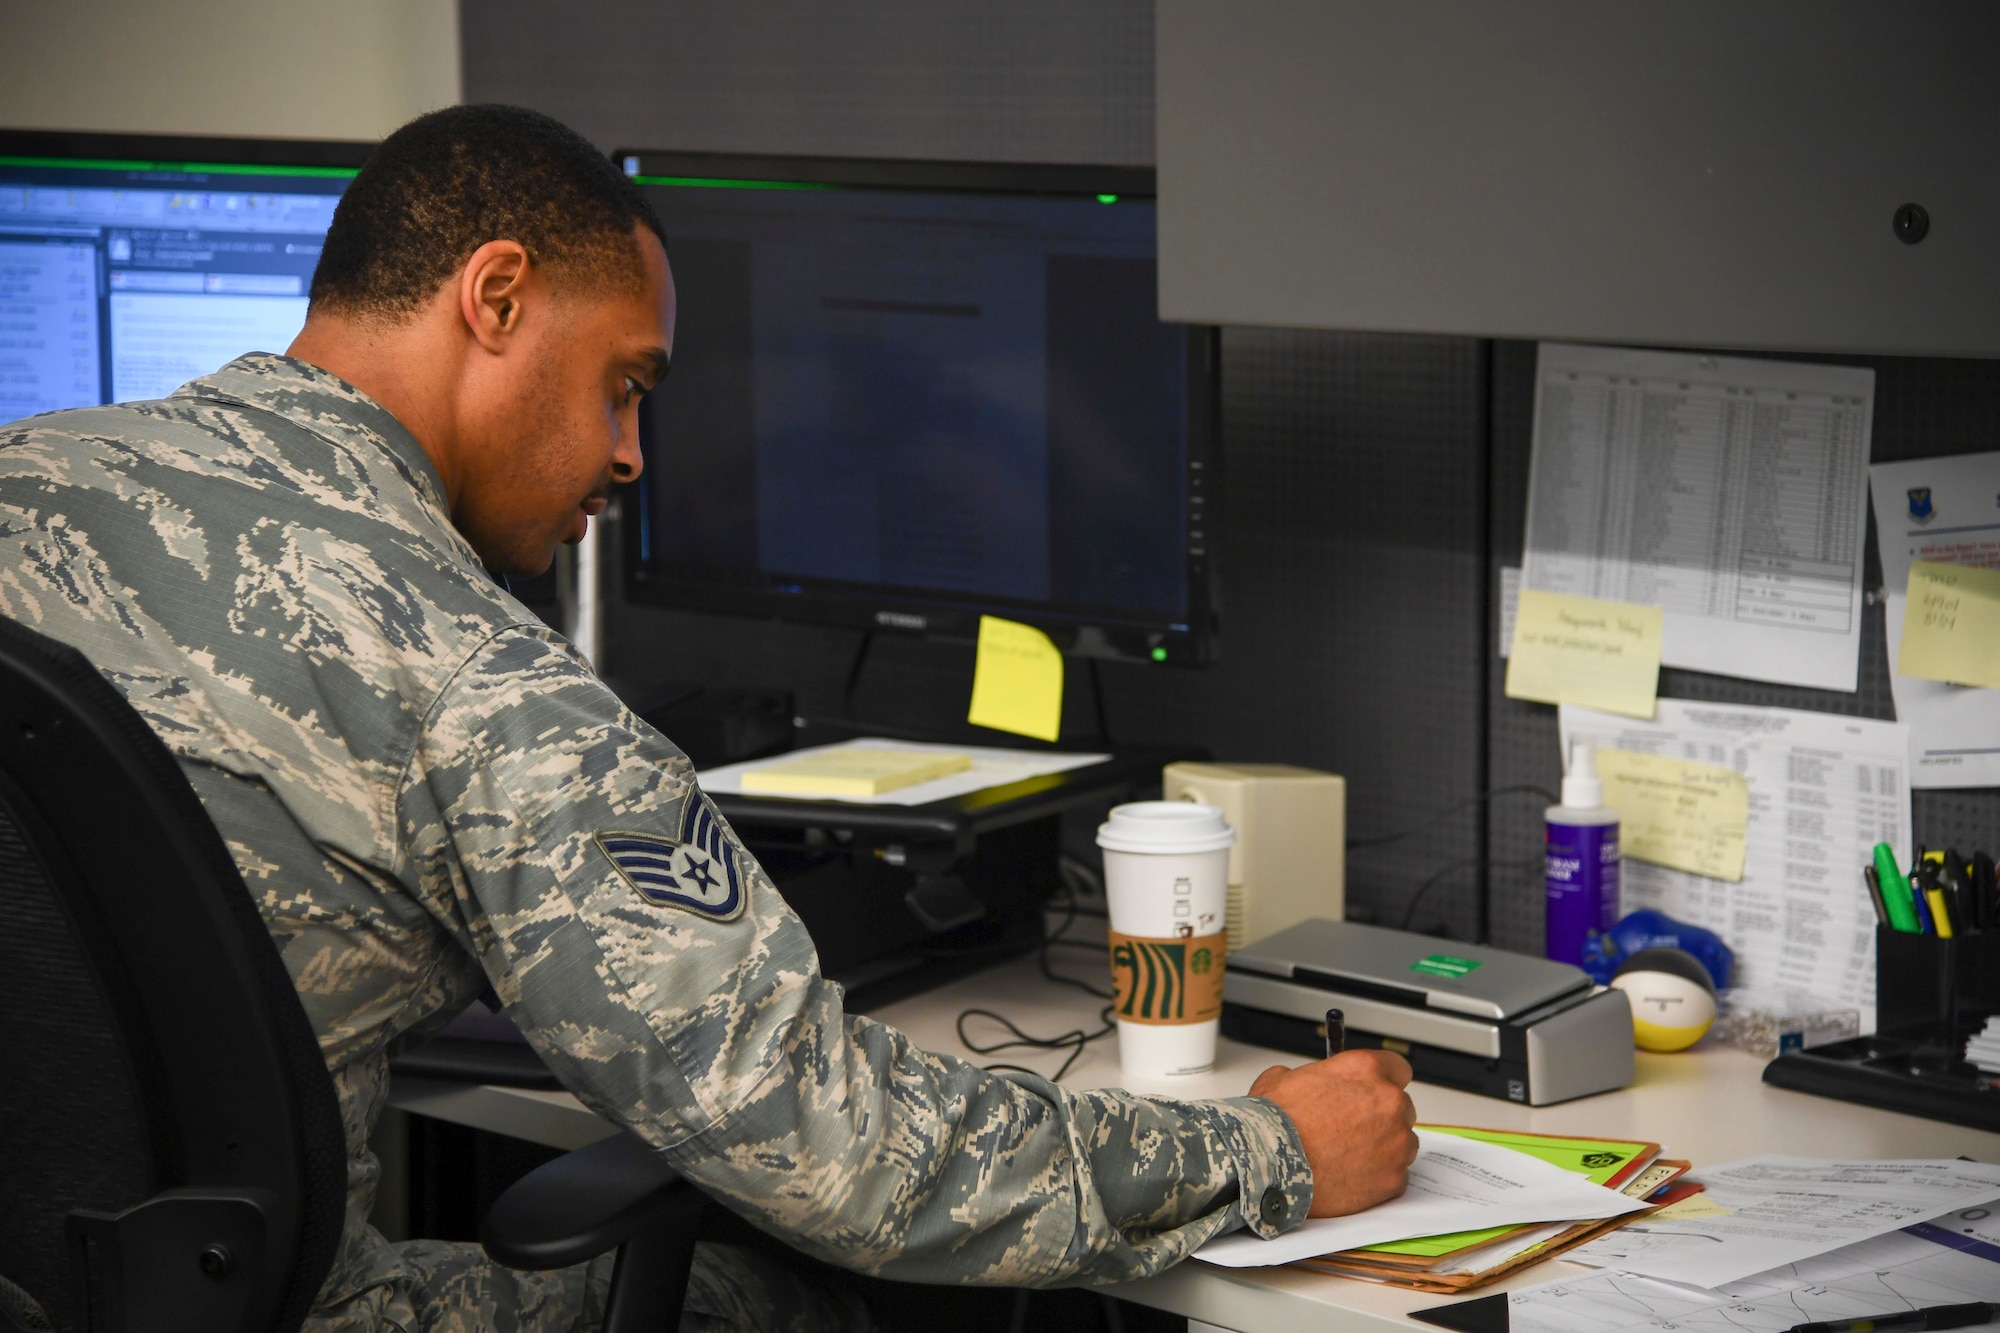 Staff Sergeant LeWillie Neal, 2nd Force Support Squadron NCO in charge of outbound assignments, multitasks while virtually helping an Airman outprocess at Barksdale Air Force Base, La., May 21, 2020. Members of the outbound assignments team are able to complete their workload while practicing social distancing via teleworking. (U.S. Air Force photo by Senior Airman Christina Rios)